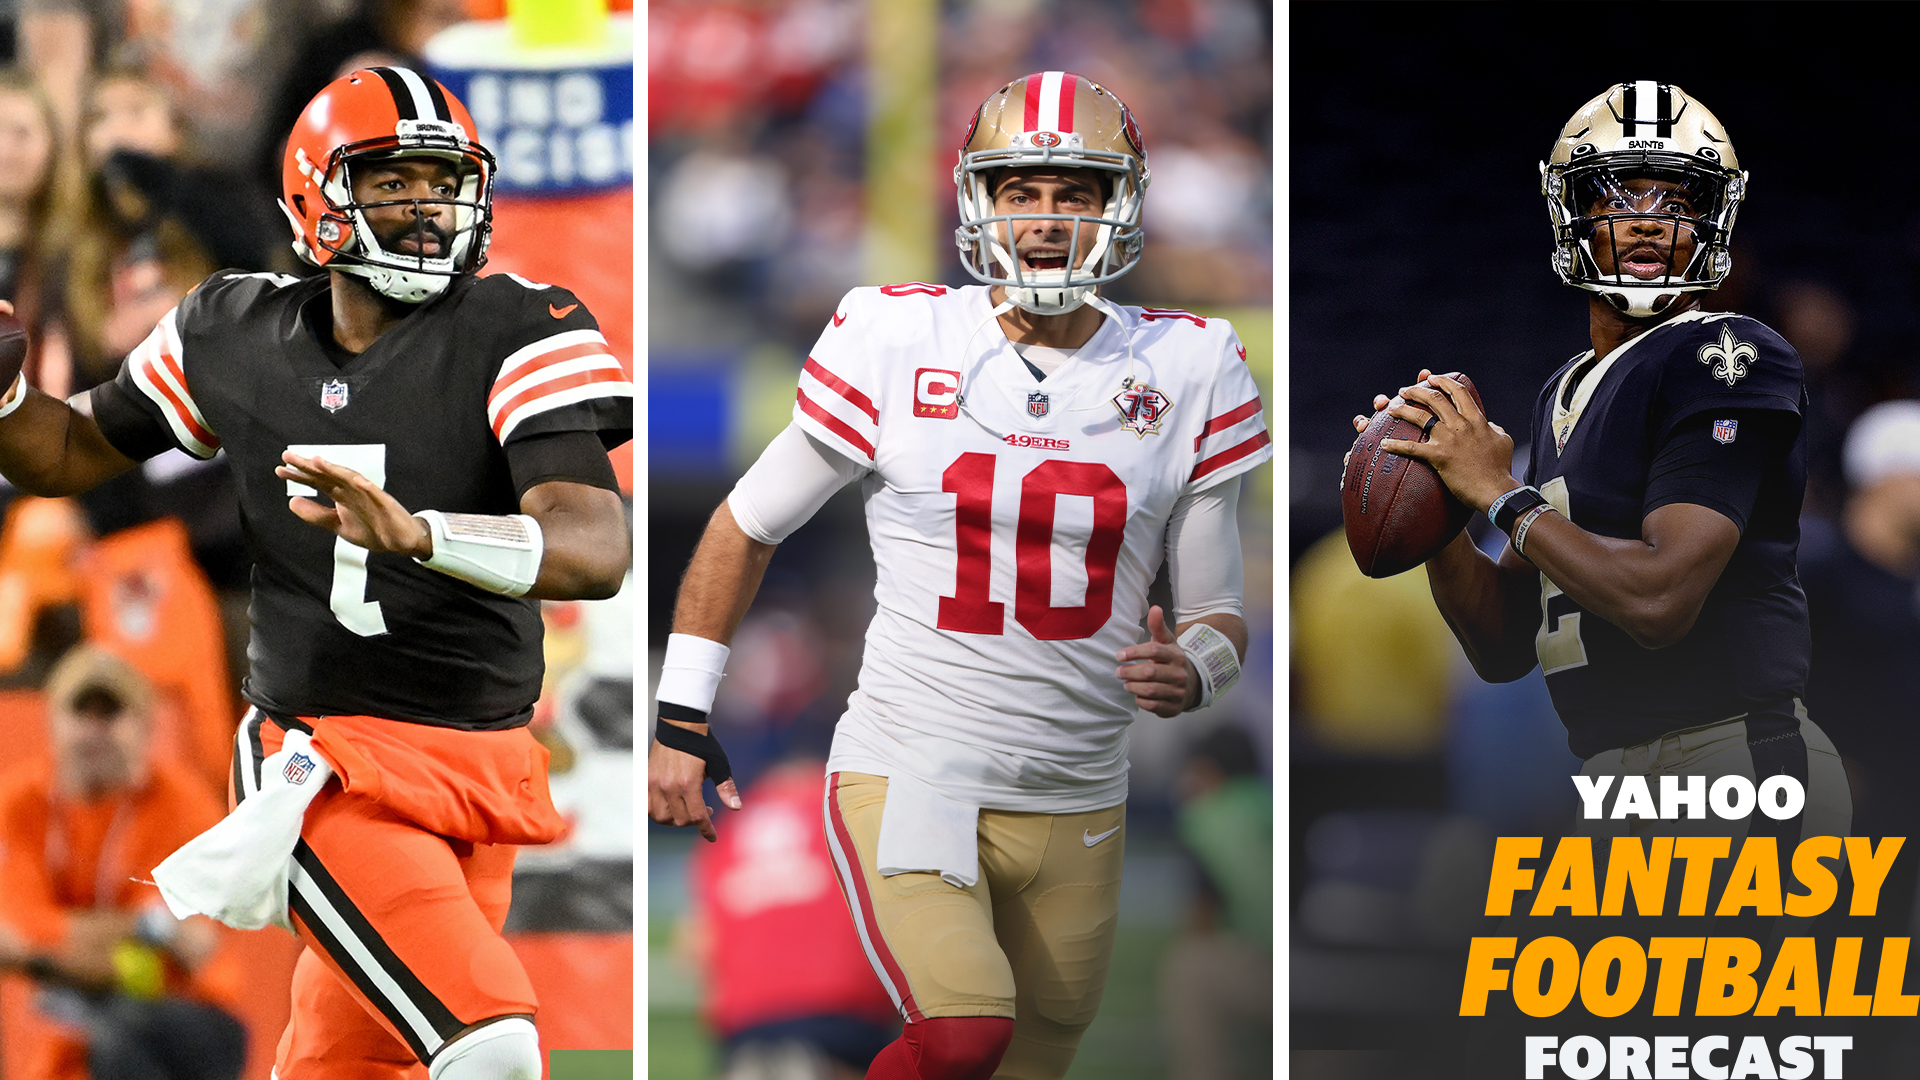 NFL free agency 2022: The top 11 quarterbacks available, ranked